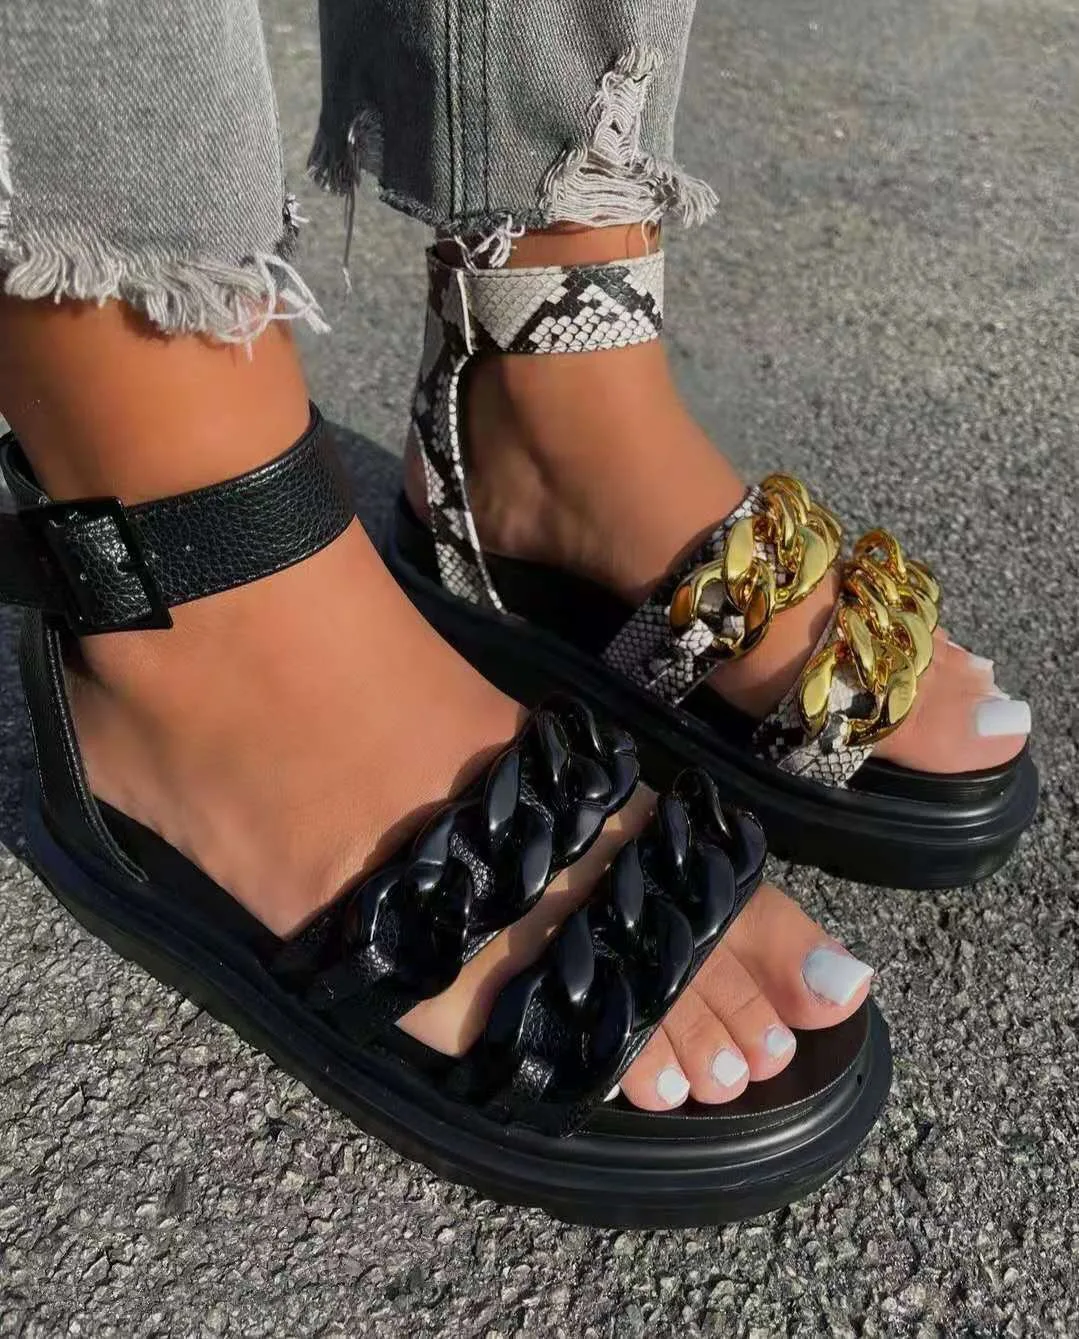 2021 Europe & American hot sale high quality thick bottom shoes fashion metal chain women out street plus size sandals